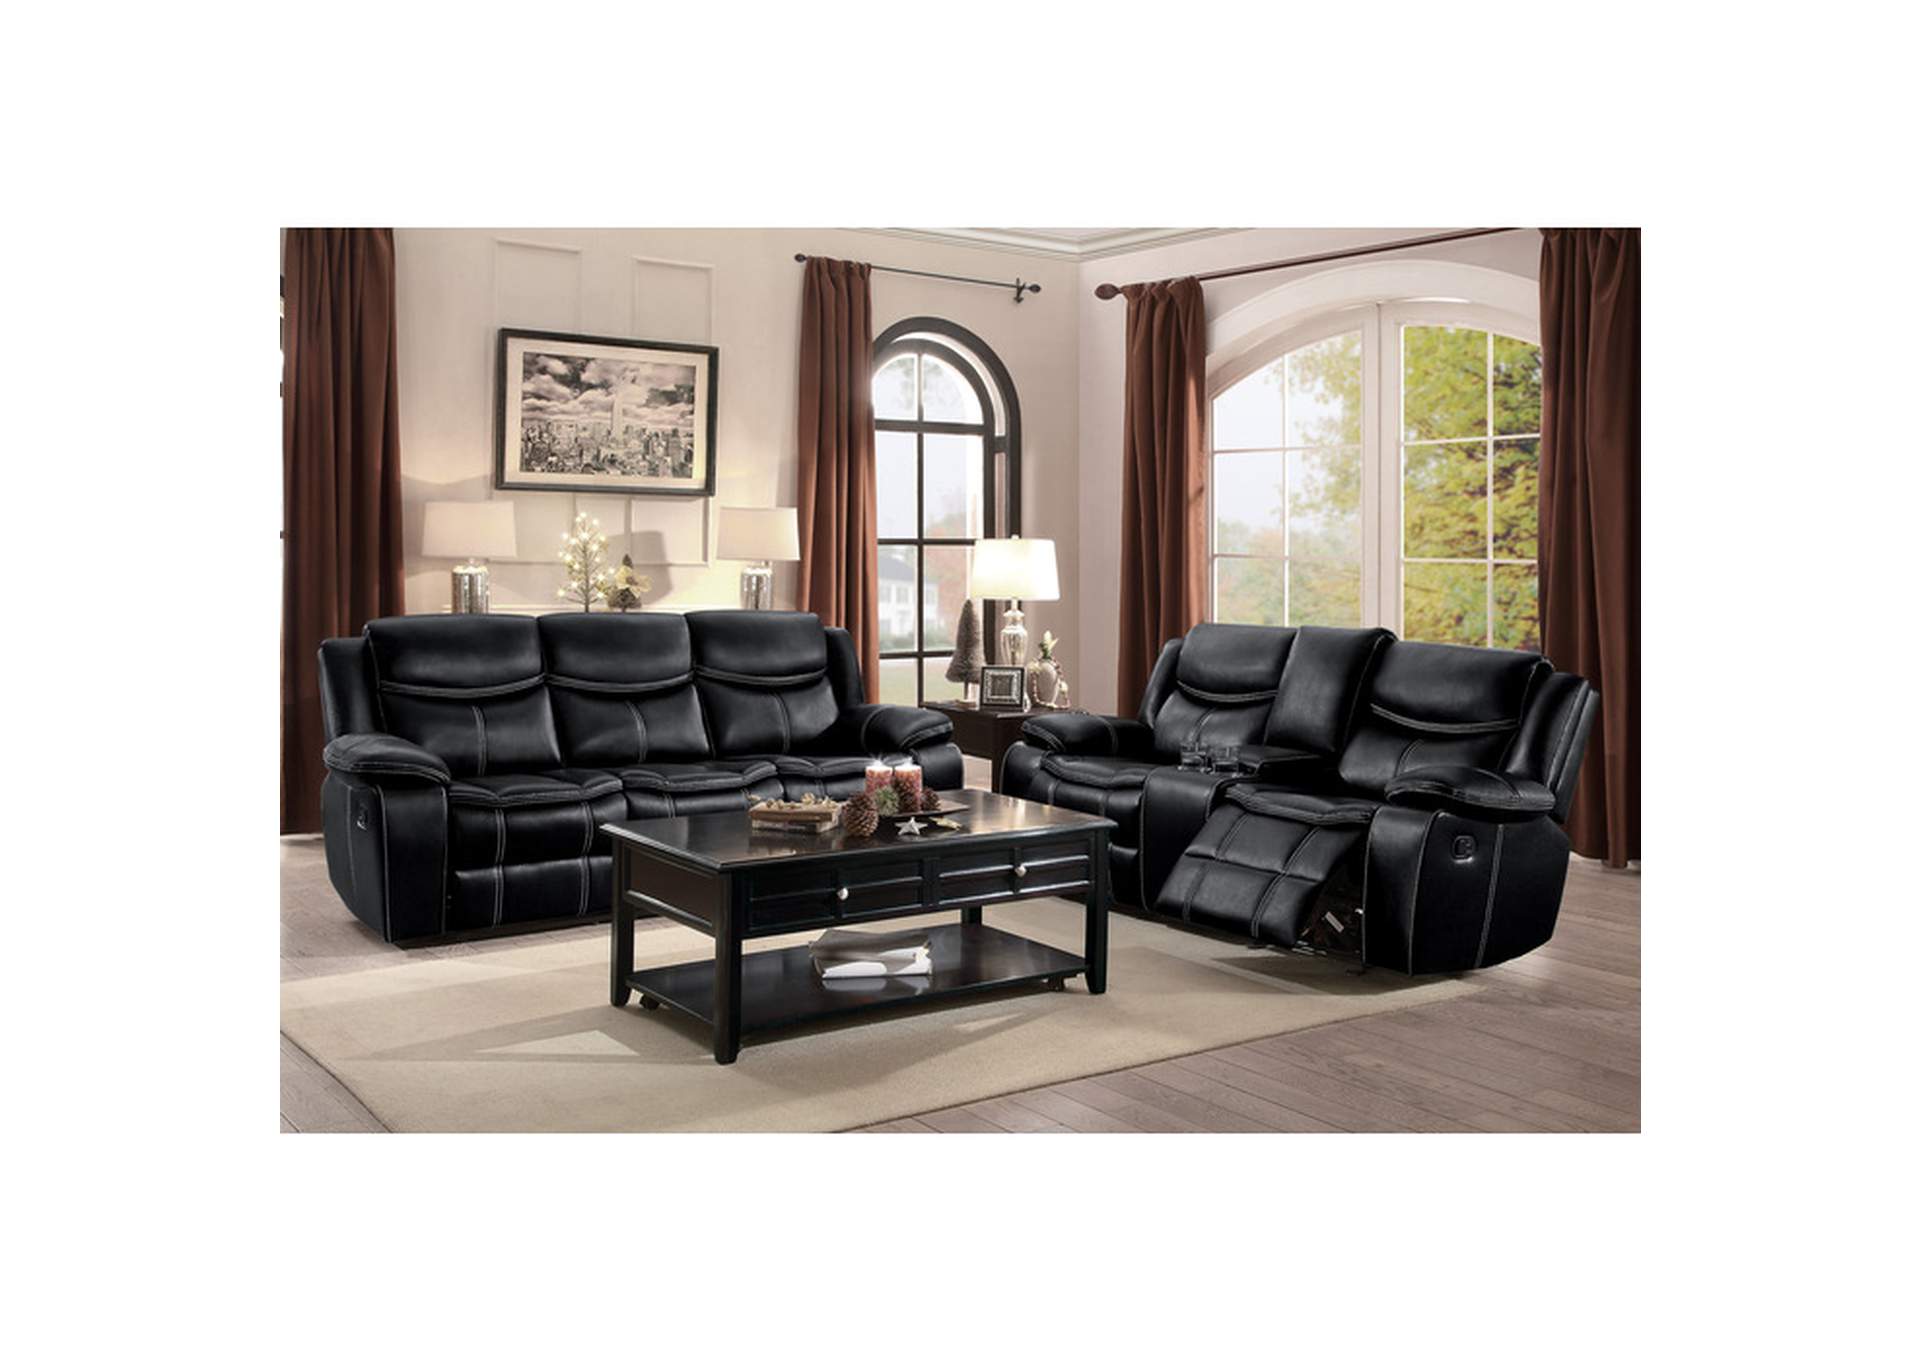 Bastrop Double Glider Reclining Love Seat with Center Console,Homelegance